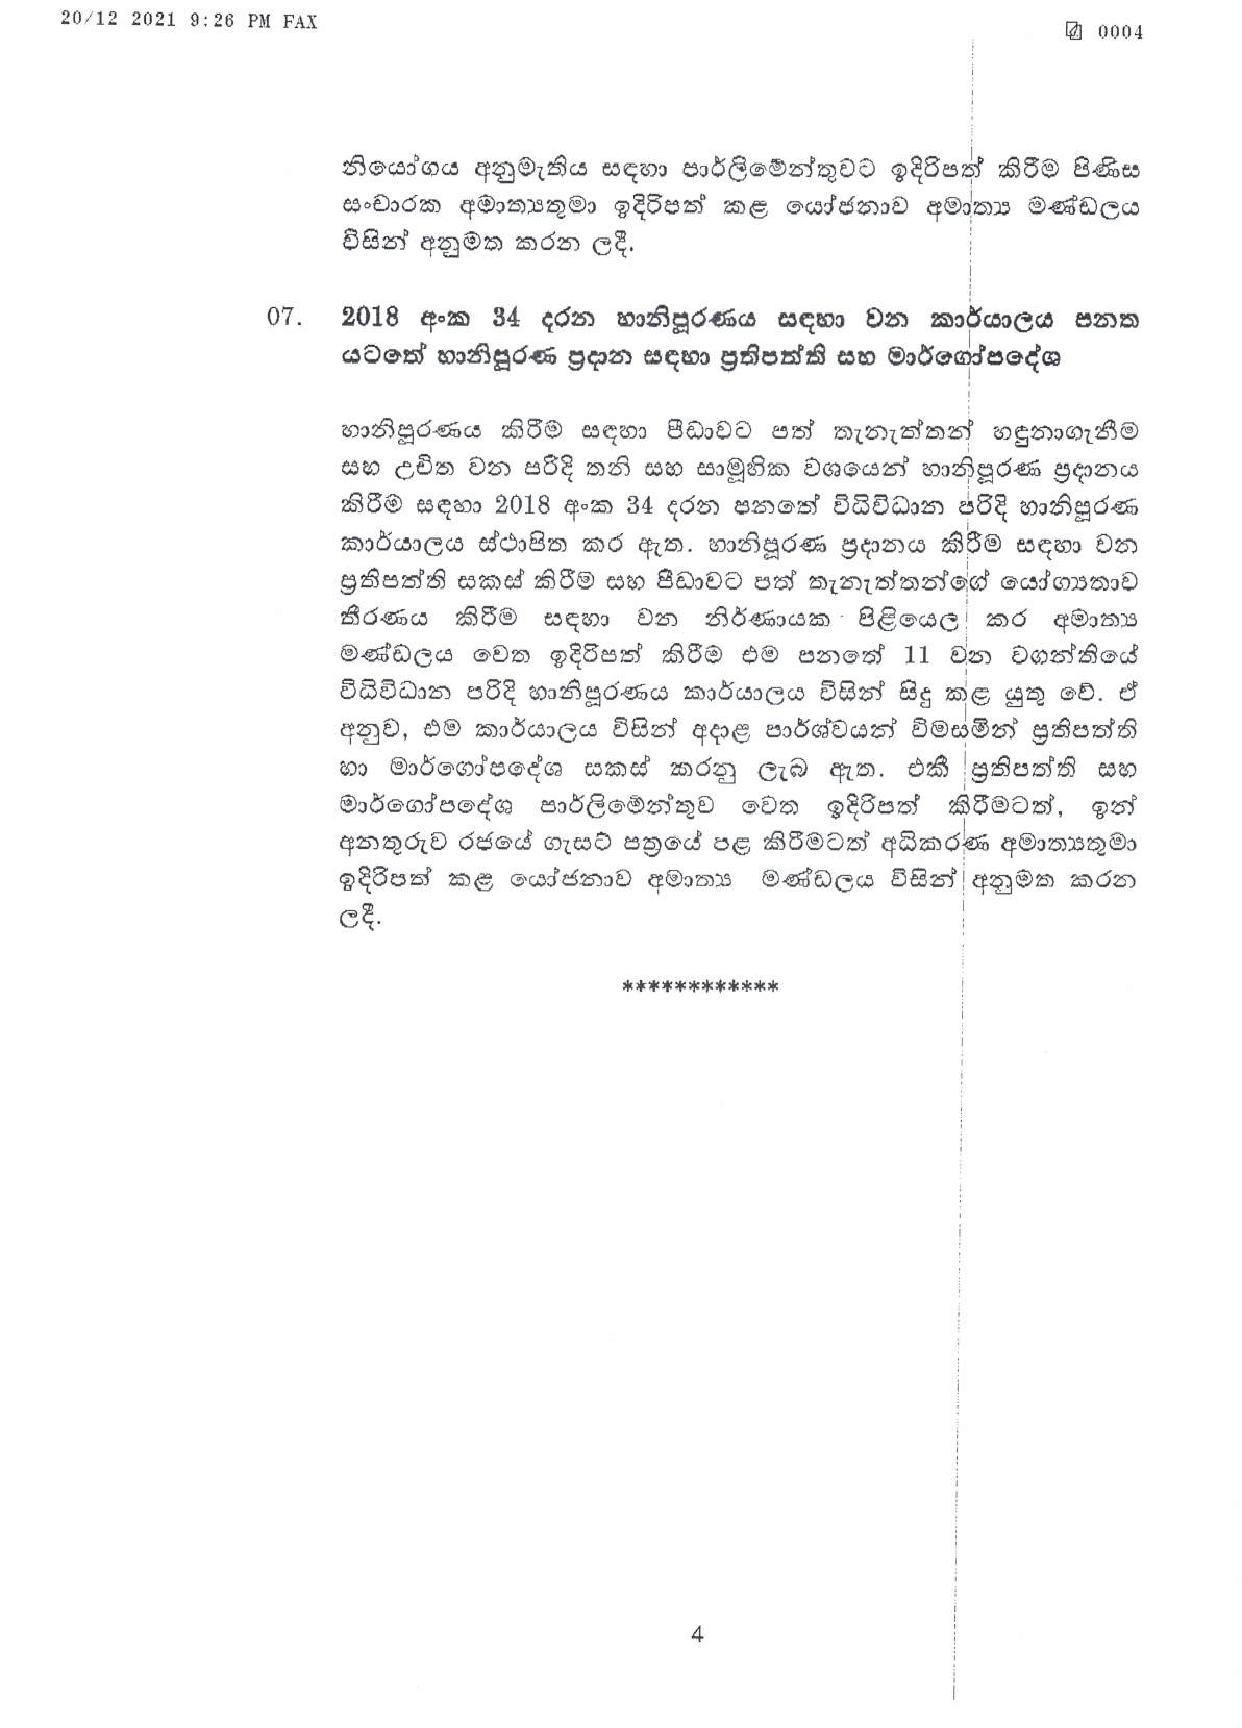 Cabinet Decisions on 20.12.2021 page 004